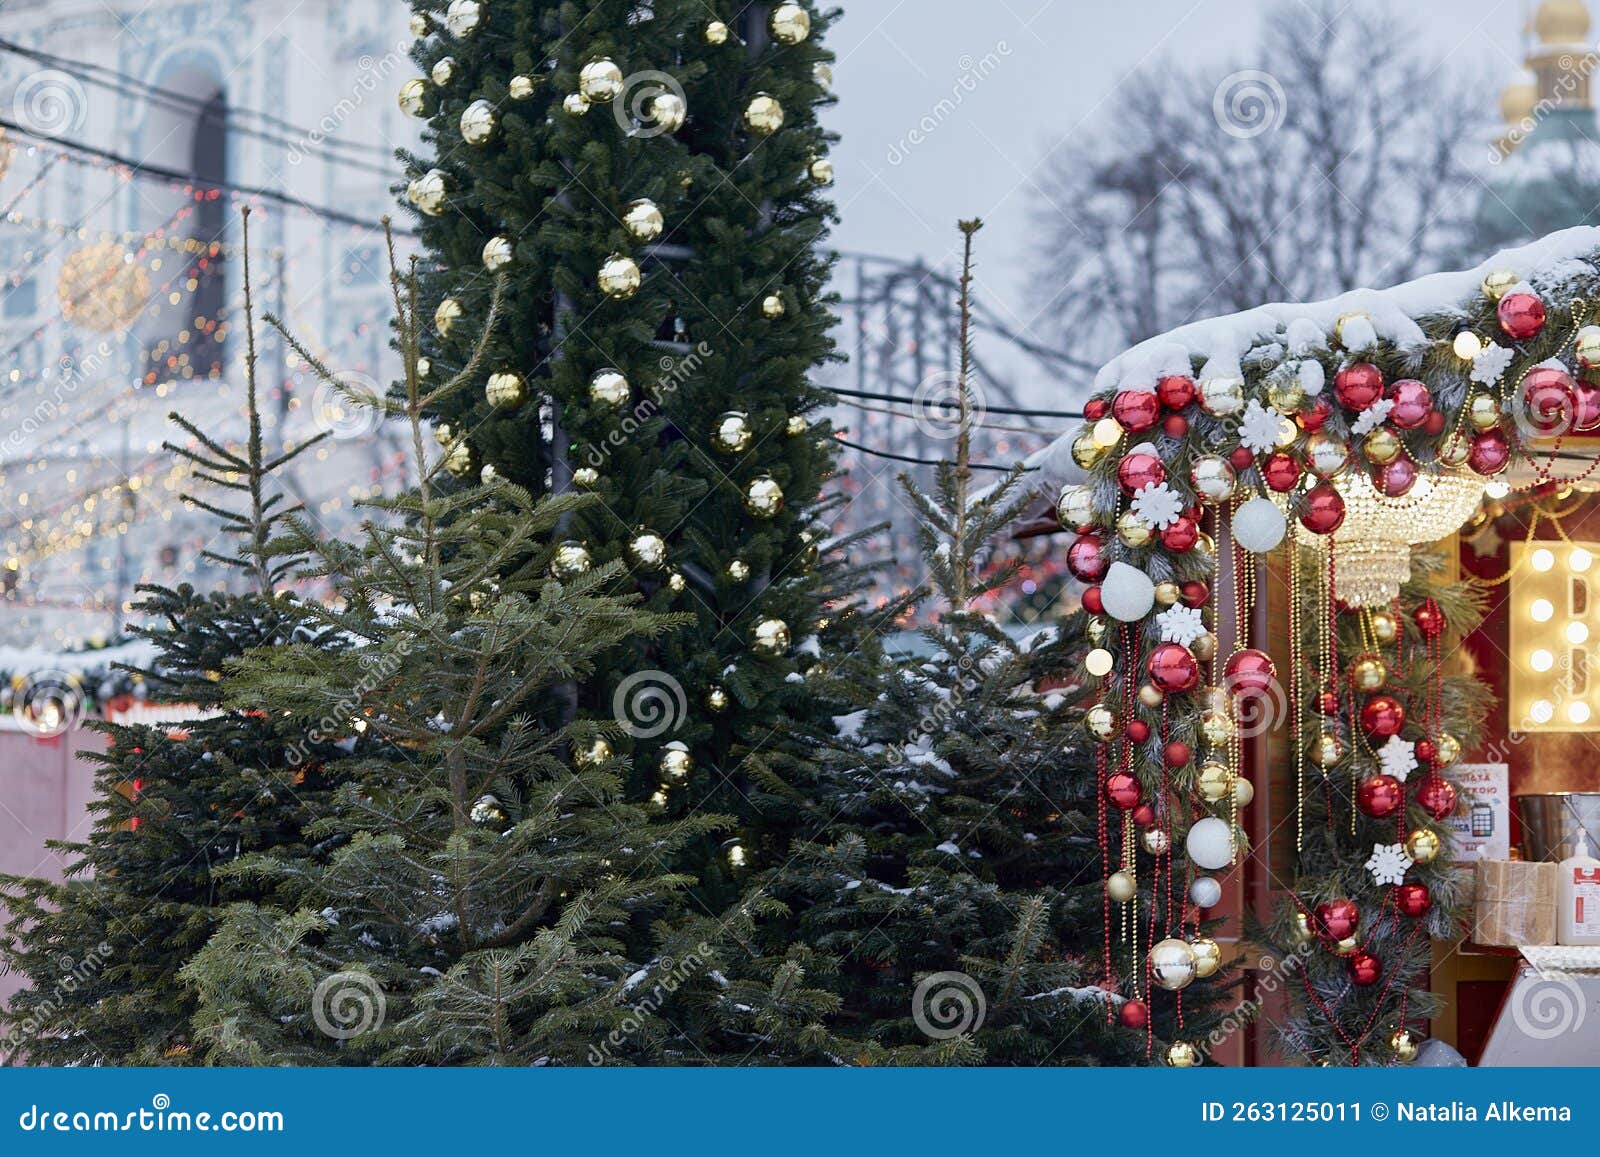 Aesthetic Outdoor Christmas Tree and Decorations with Bright Lights Outdoor  Background. New Year Holidays Stock Image - Image of glowing, garland:  263125011